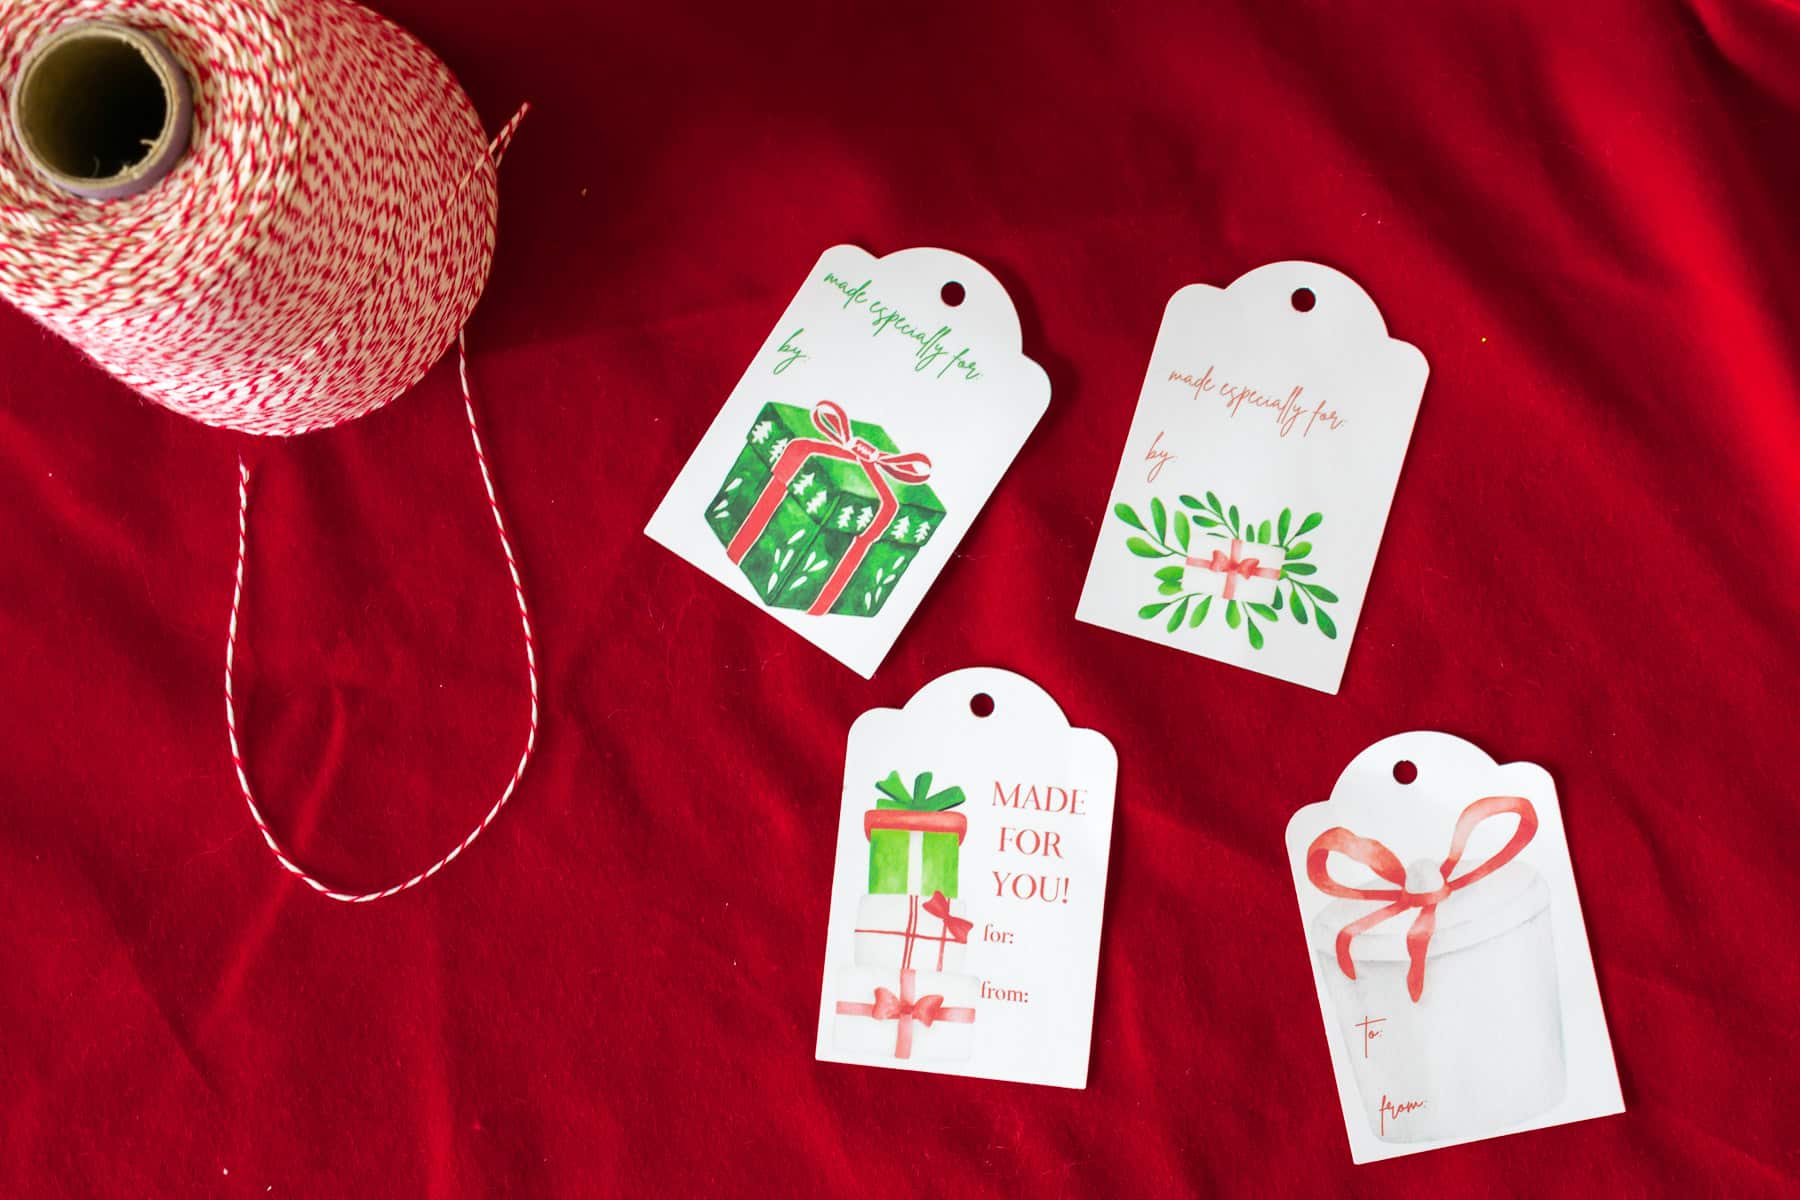 Made with Love Tags, Christmas Gift Tags, Homemade Gift, Baked Gift,  Cookies, Child Gift, Baked, Handmade, Merry Christmas Holiday Gift Tags